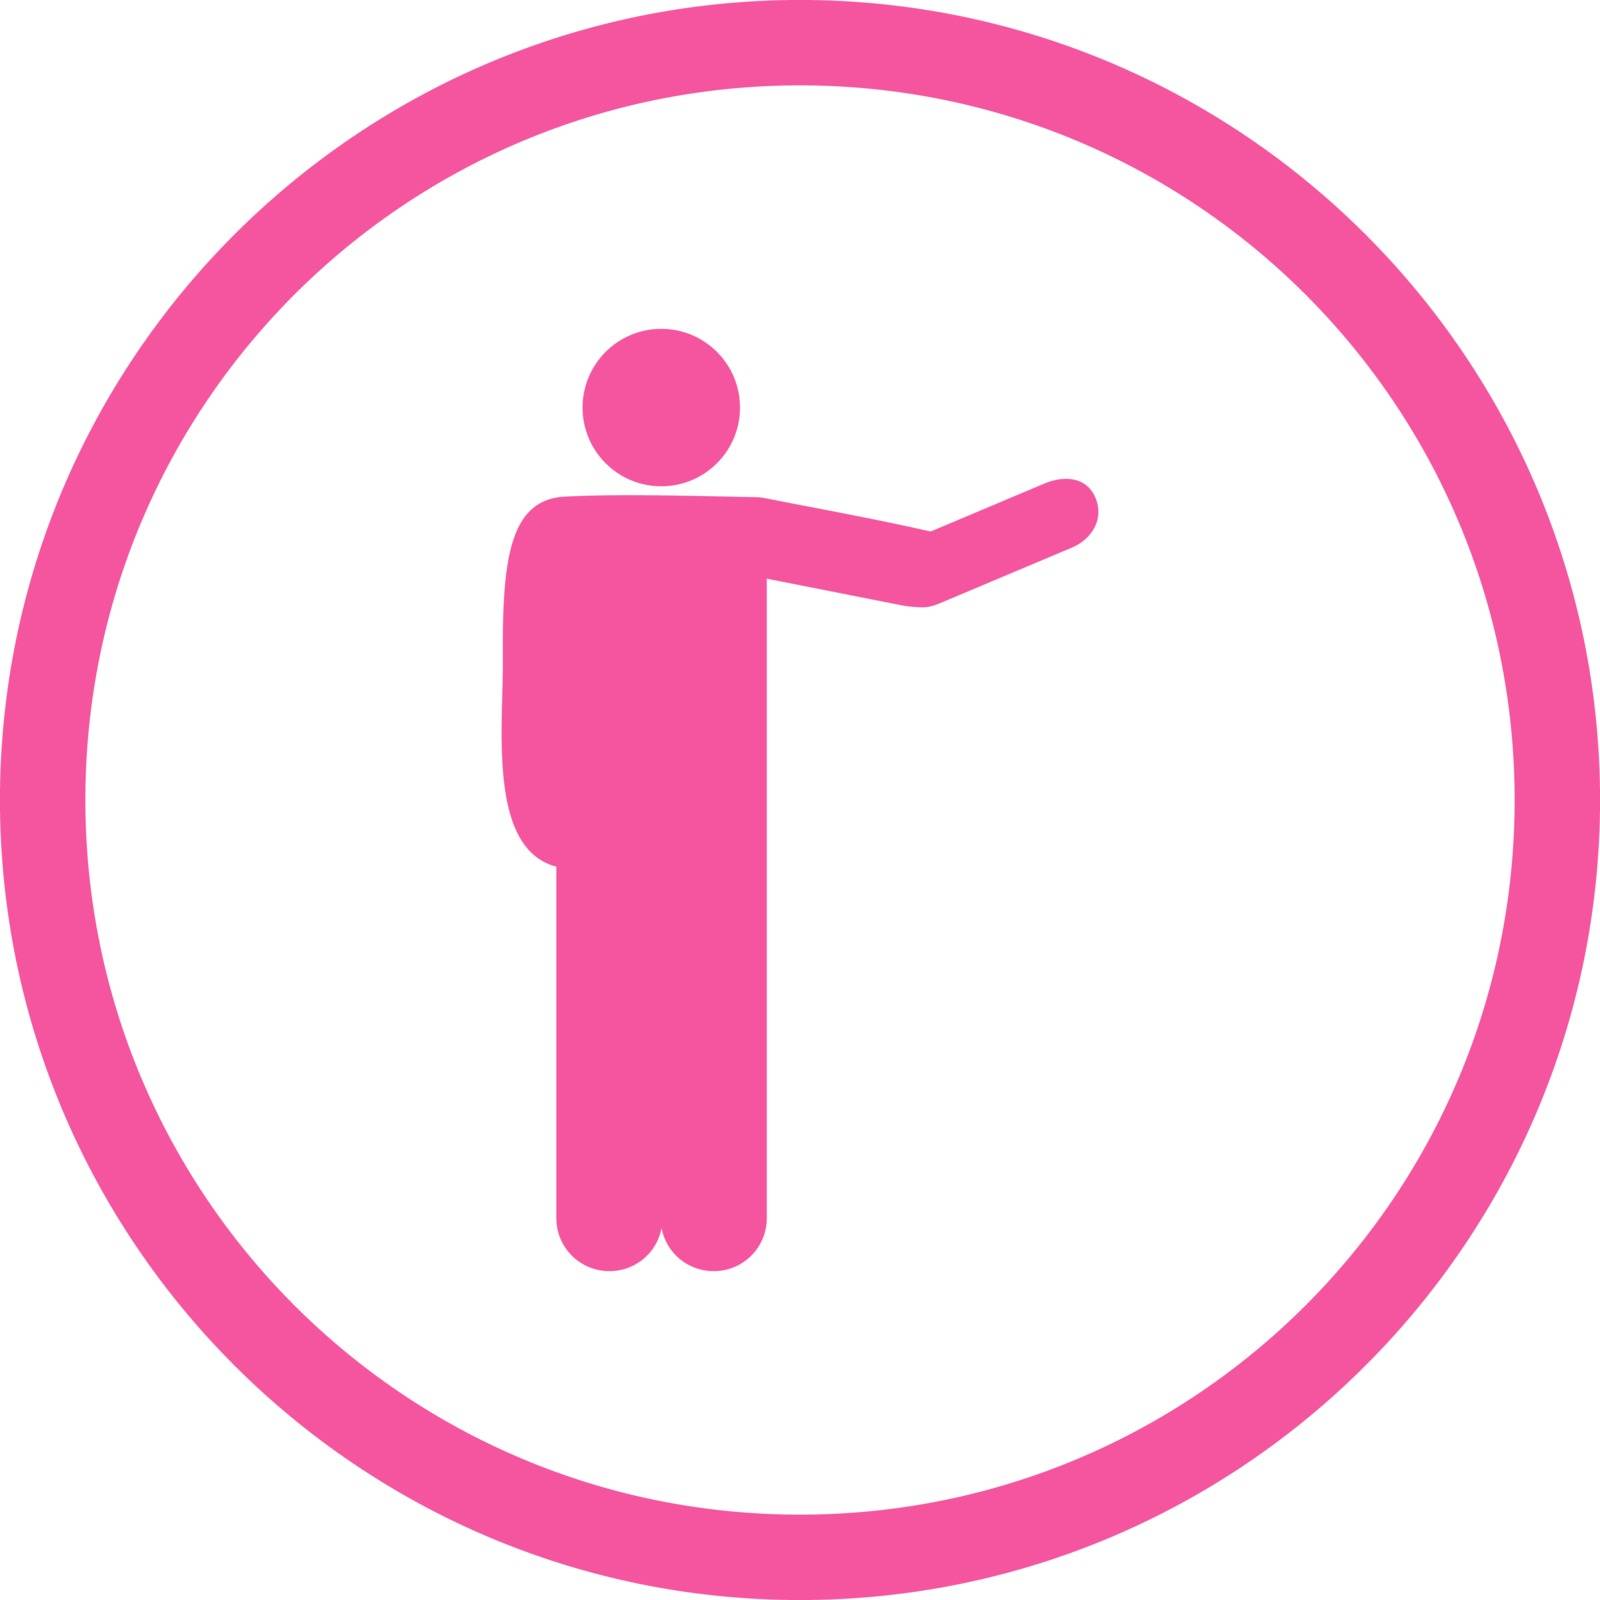 Show vector icon. This rounded flat symbol is drawn with pink color on a white background.